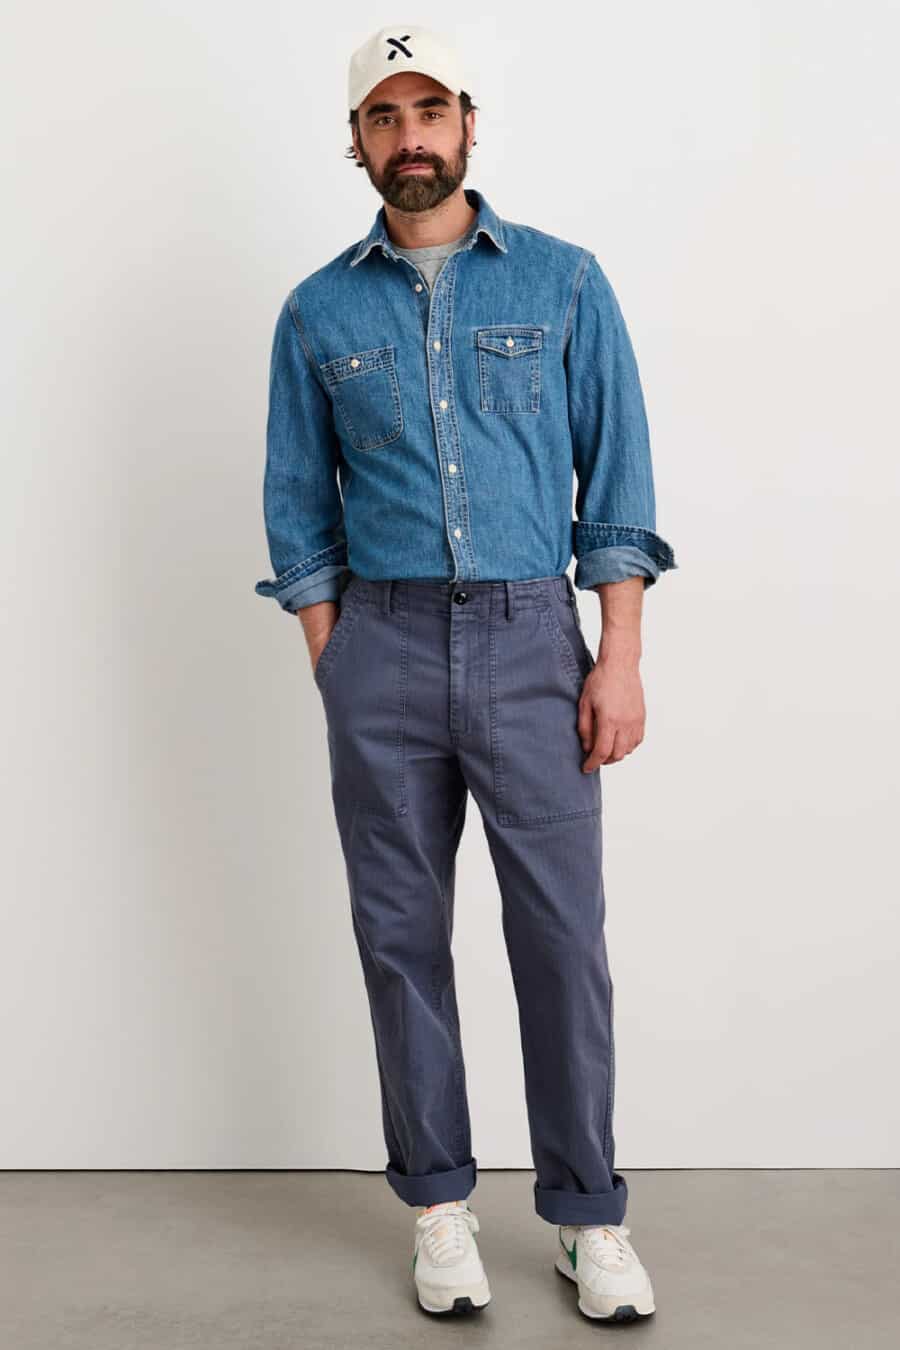 Men's grey-blue utility pants, tucked in grey T-shirt, mid-blue denim shirt with rolled sleeves, white baseball cap and white Nike sneakers outfit